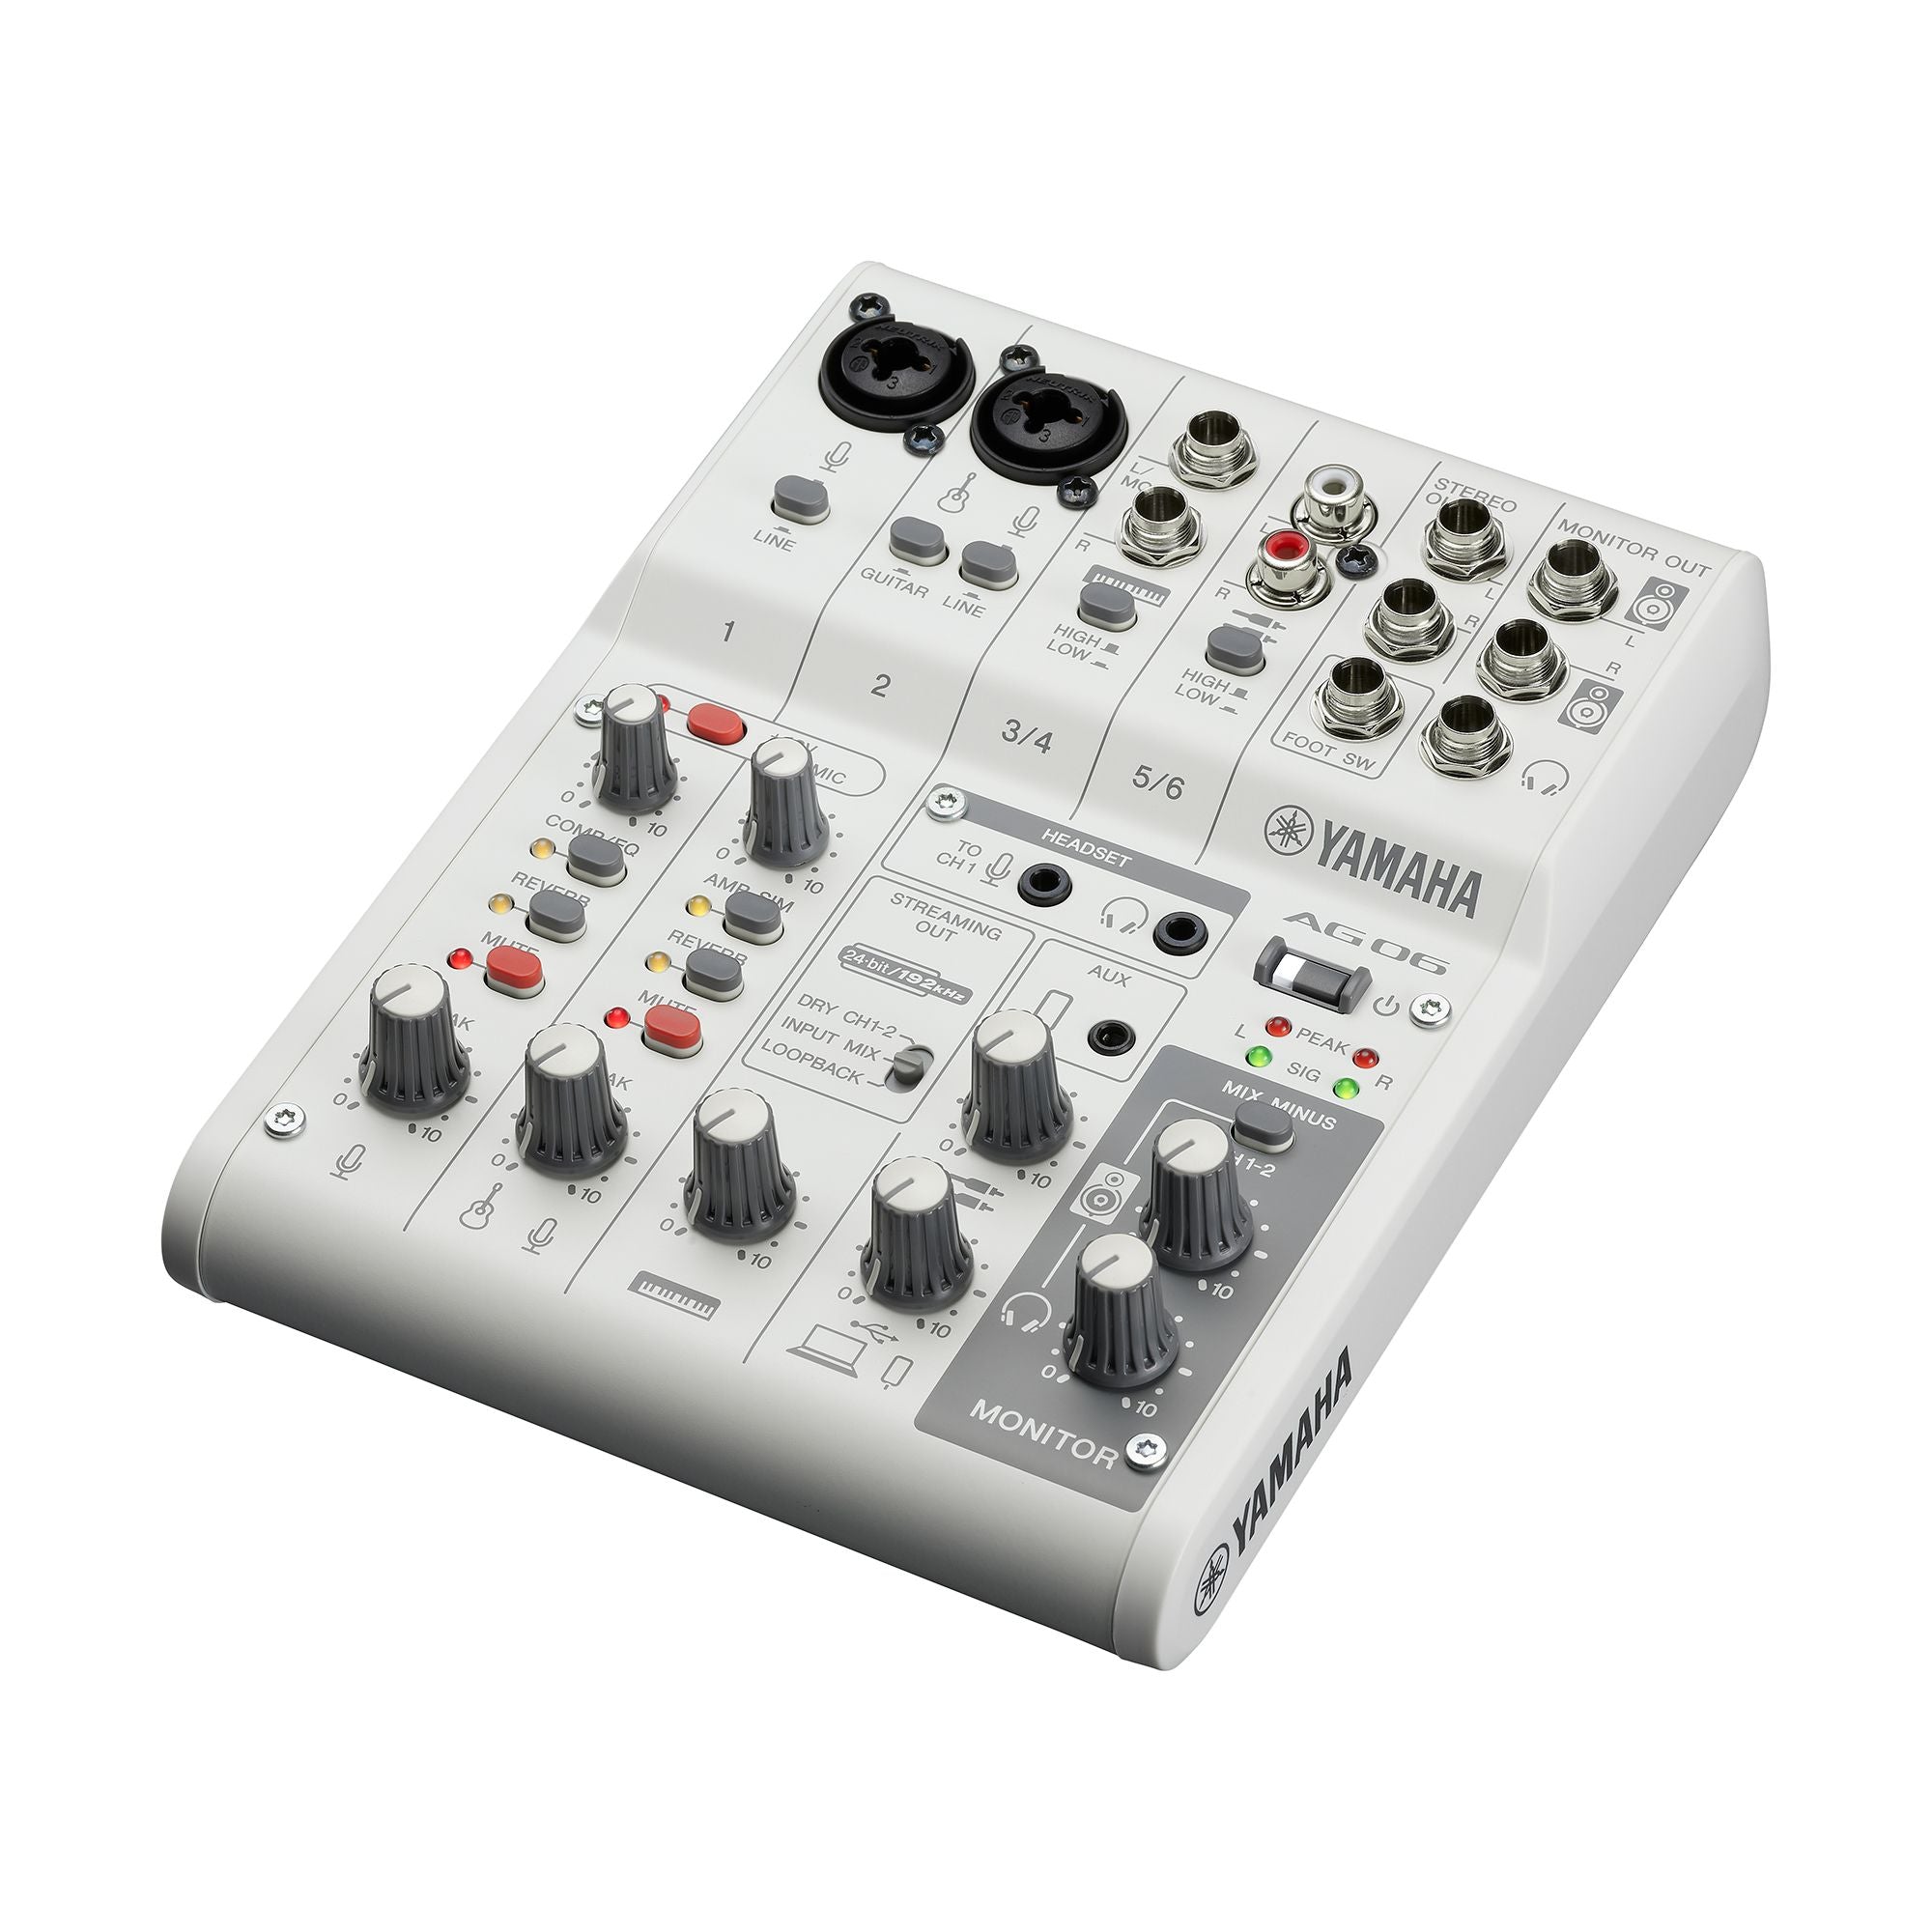 YAMAHA AG06 MK2 6-CHANNEL MIXER AND USB AUDIO INTERFACE